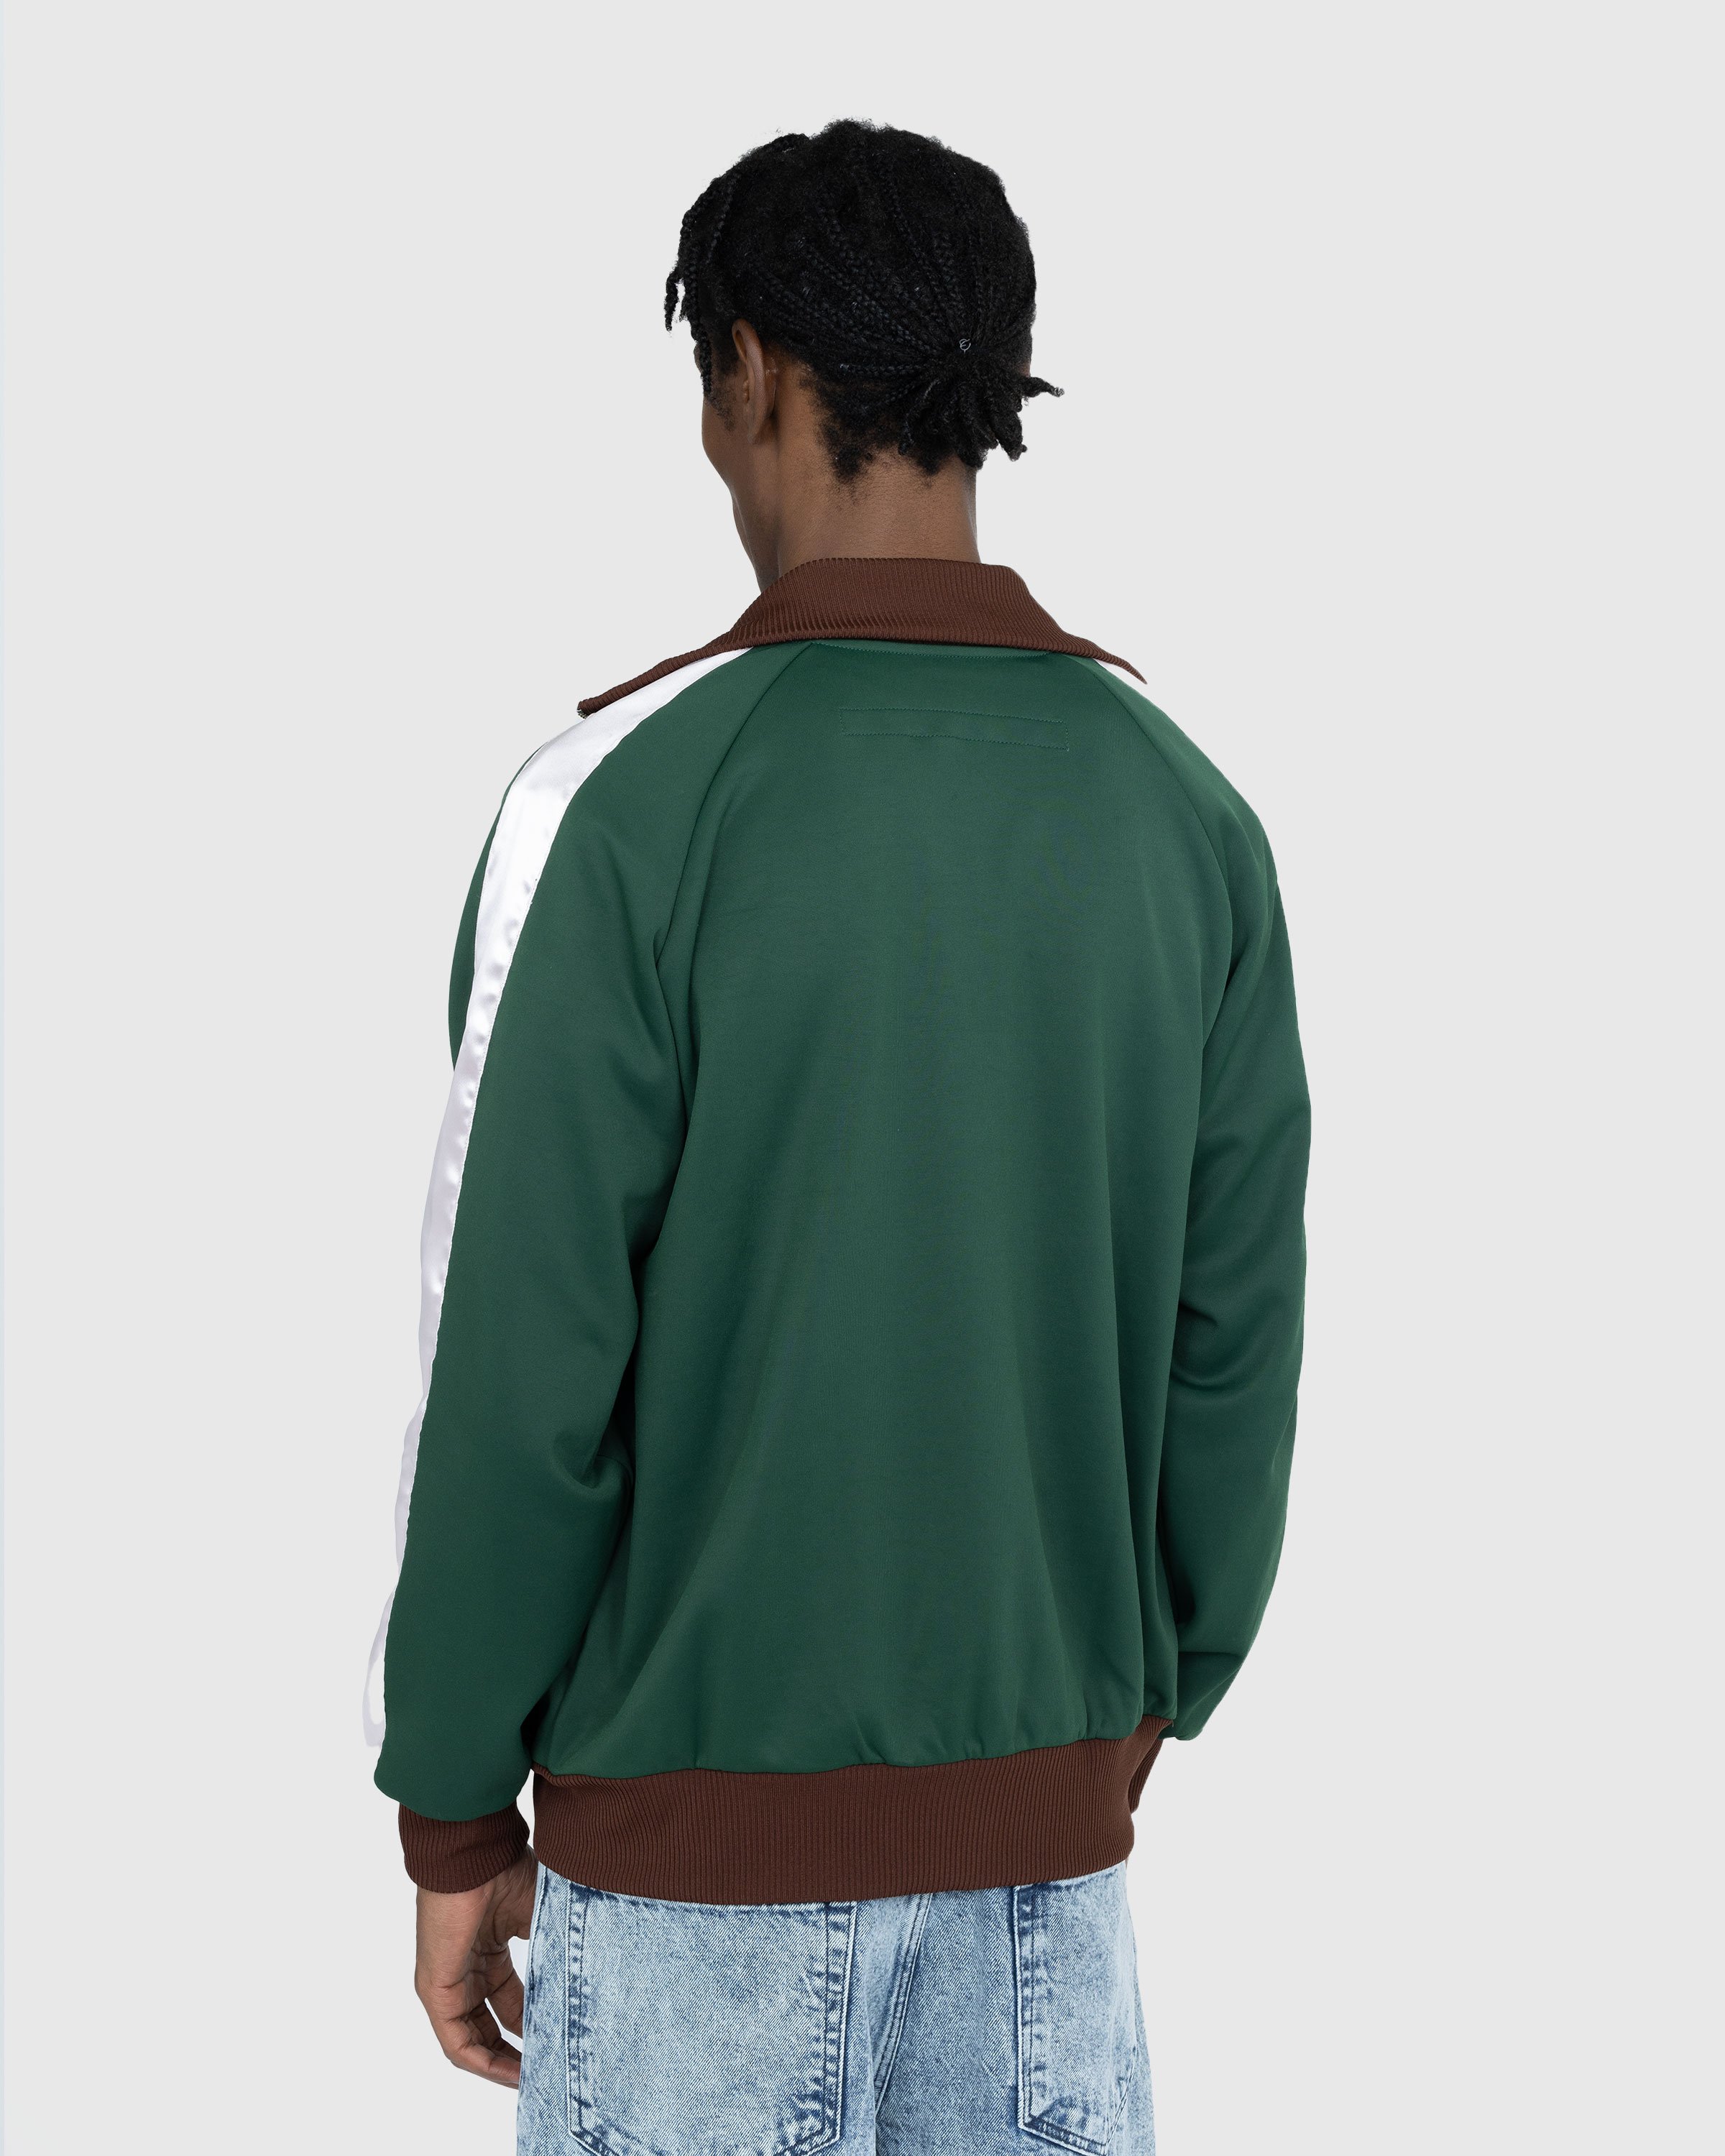 Stockholm Surfboard Club - Track Top Fall Green - Clothing - Green - Image 3